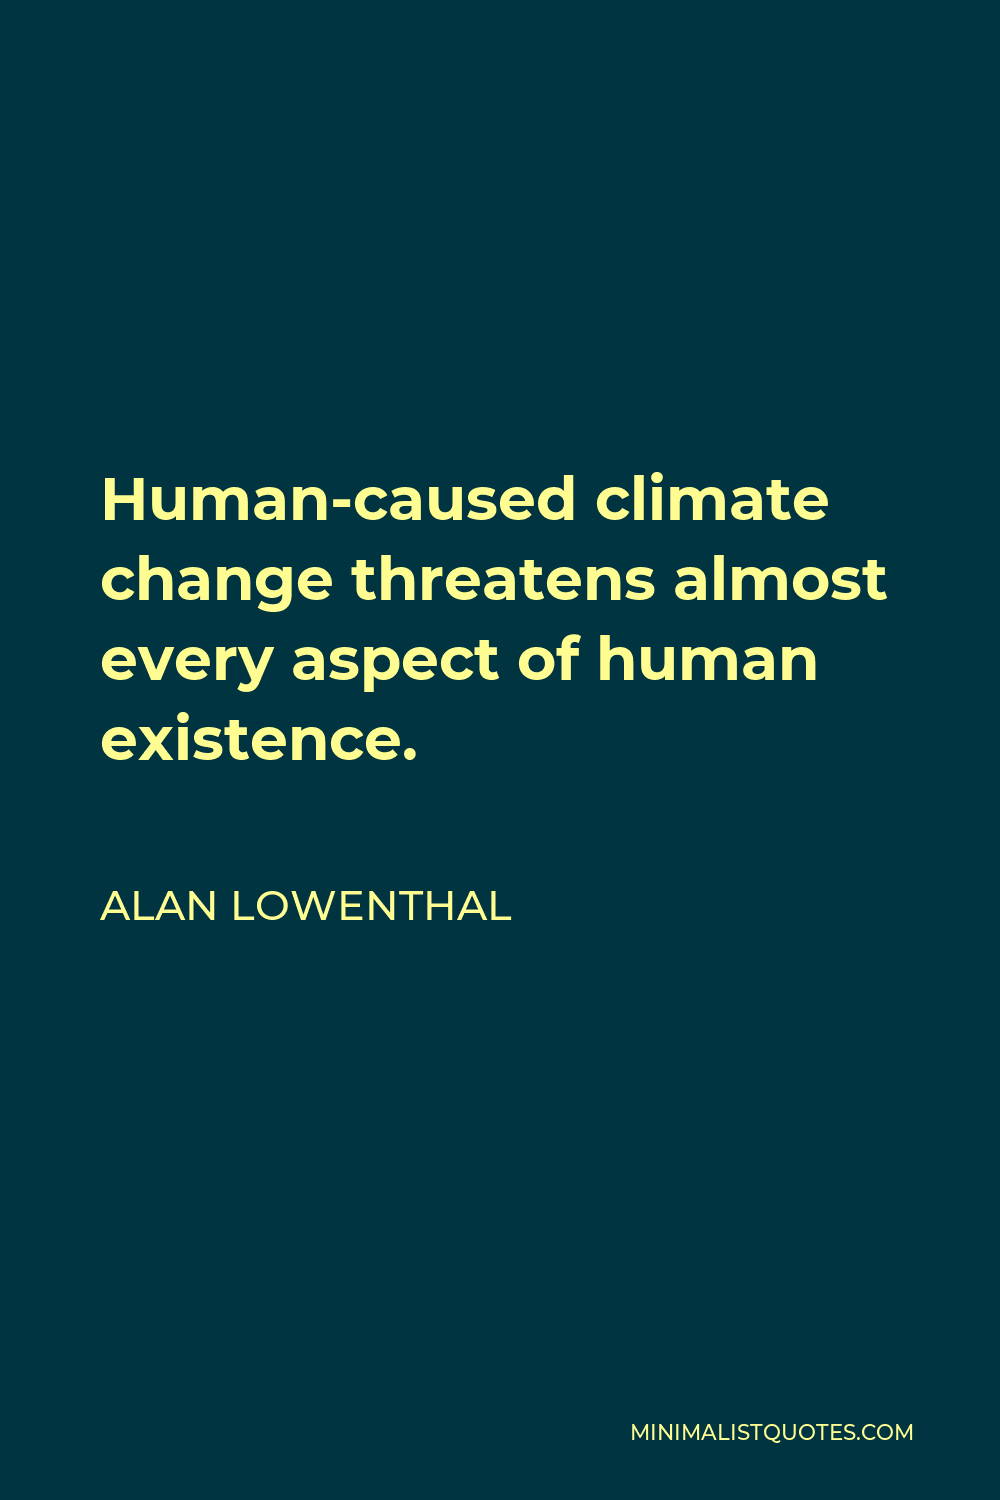 Alan Lowenthal Quote - Human-caused climate change threatens almost every aspect of human existence.